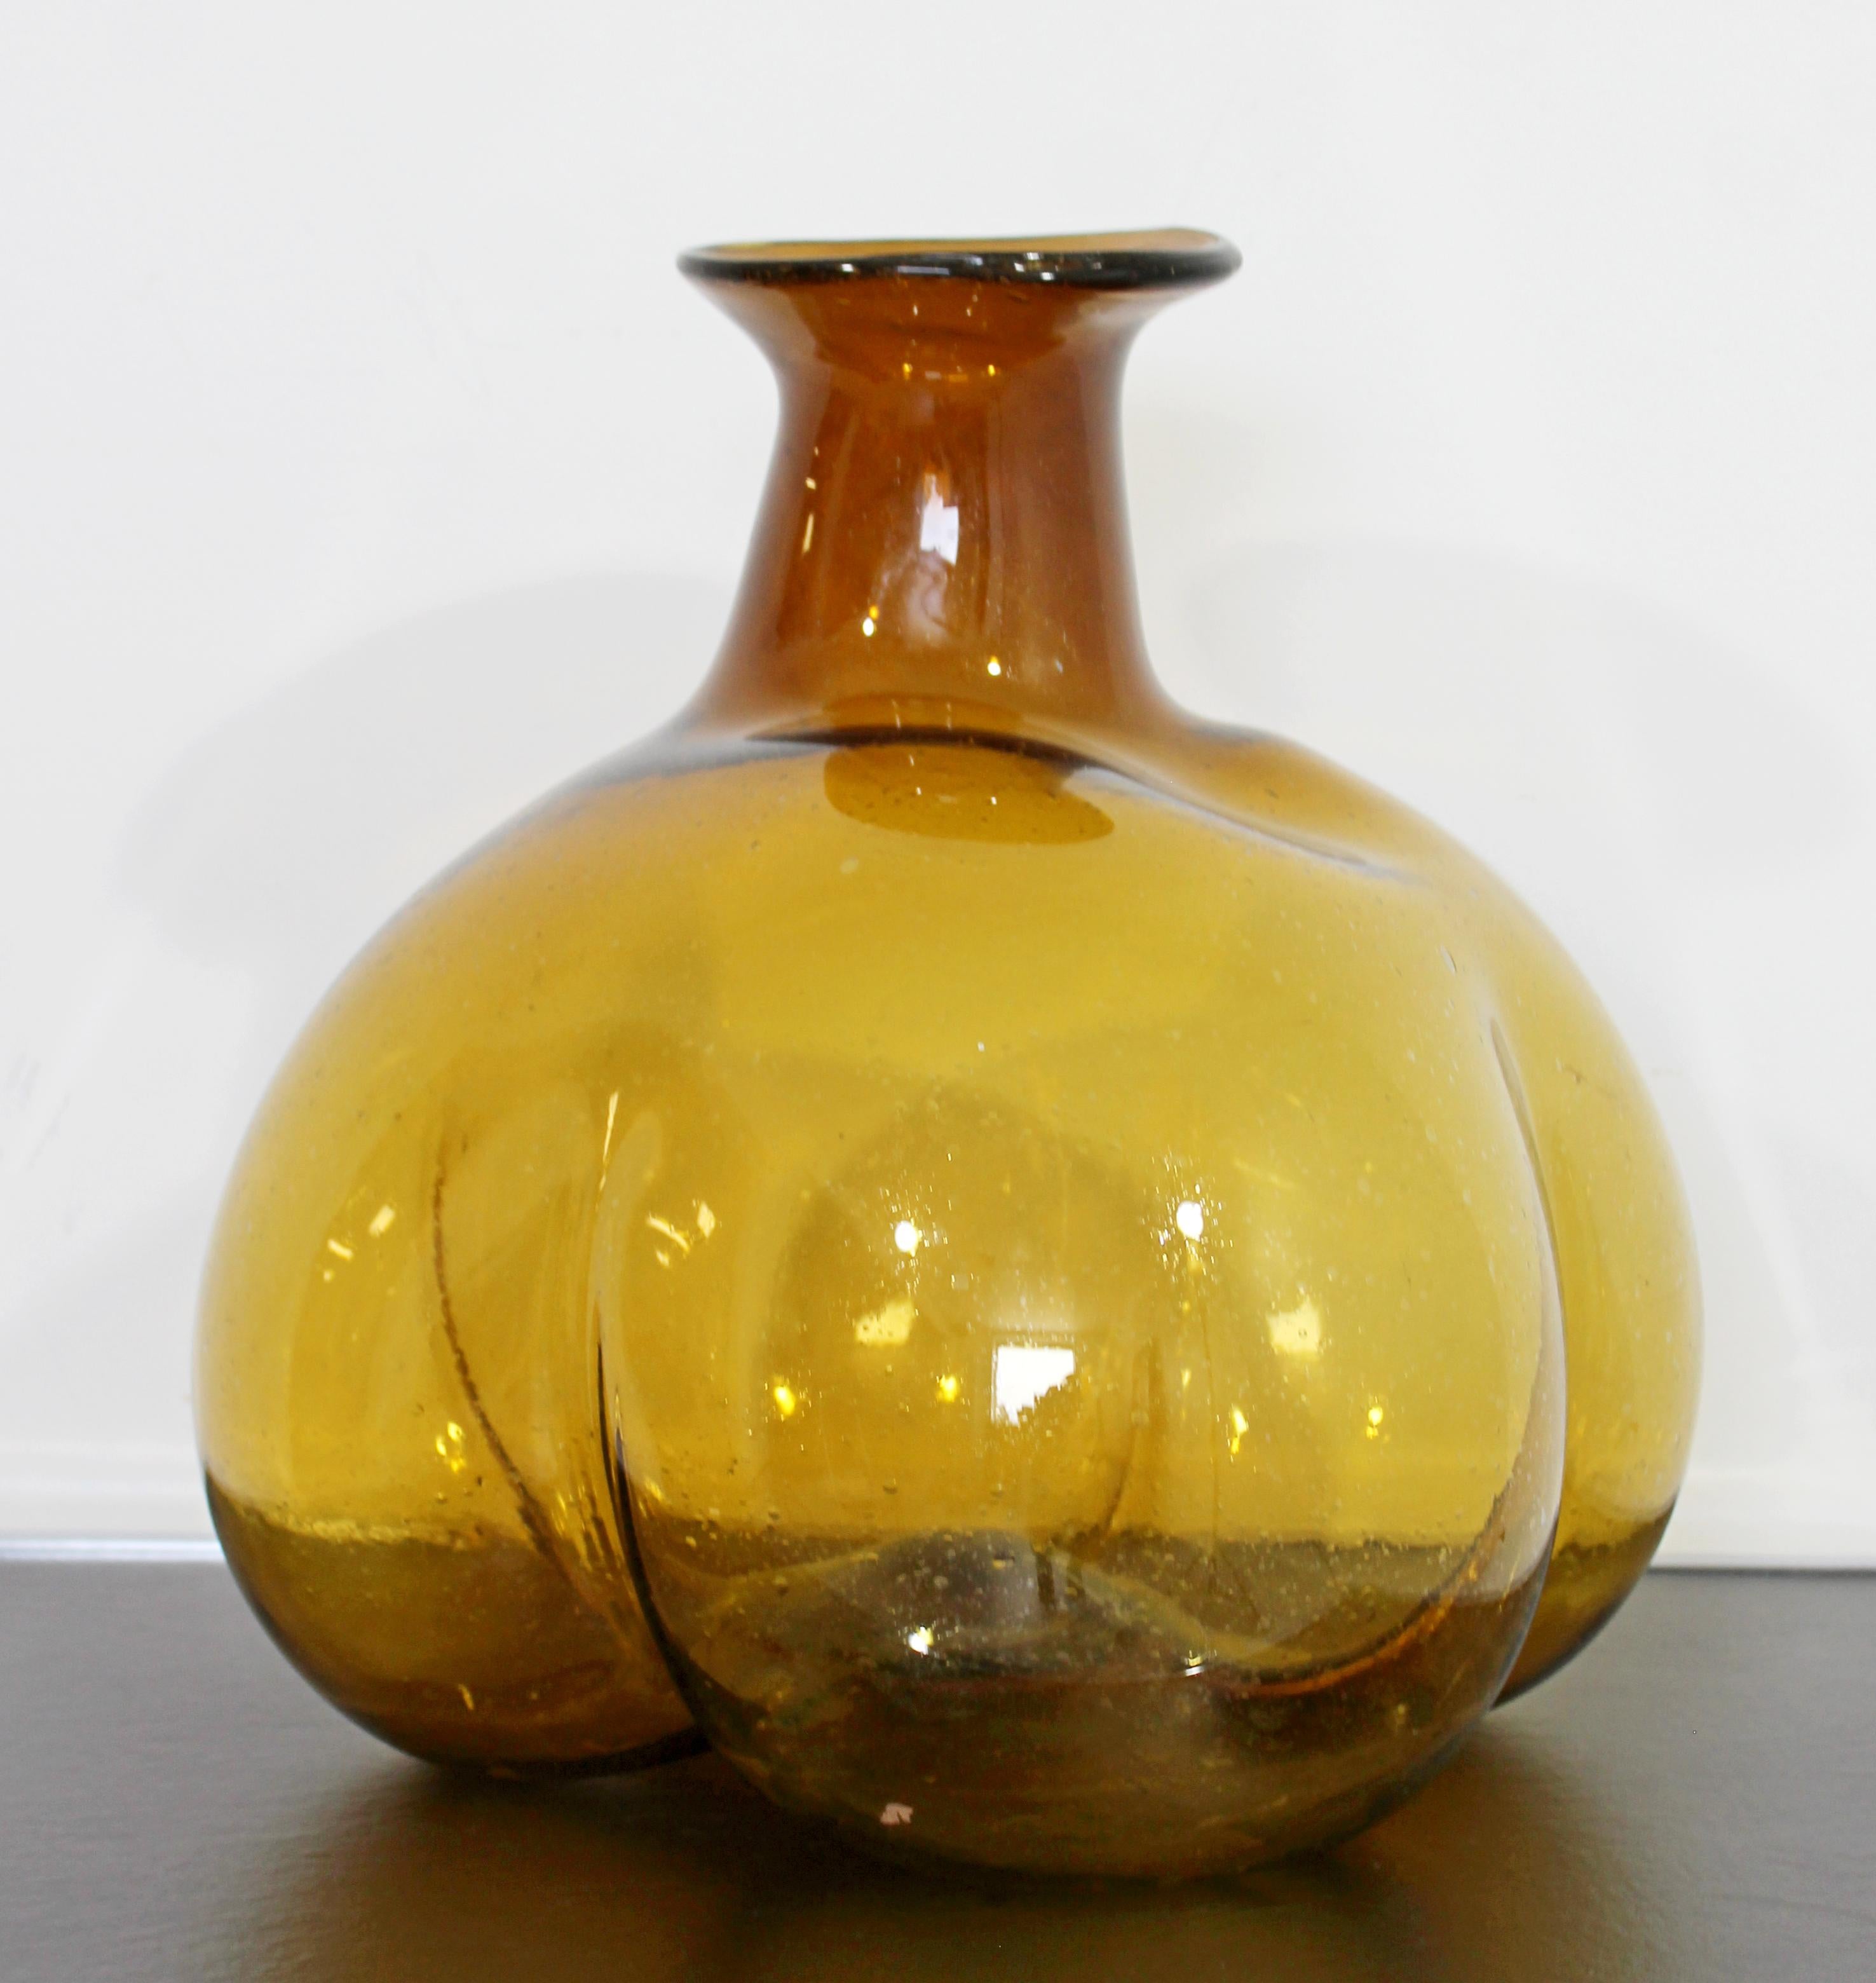 For your consideration is a stunning, large, orange, blown glass vessel vase table sculpture, signed by the artist, circa 1970s. In excellent condition. The dimensions are 12